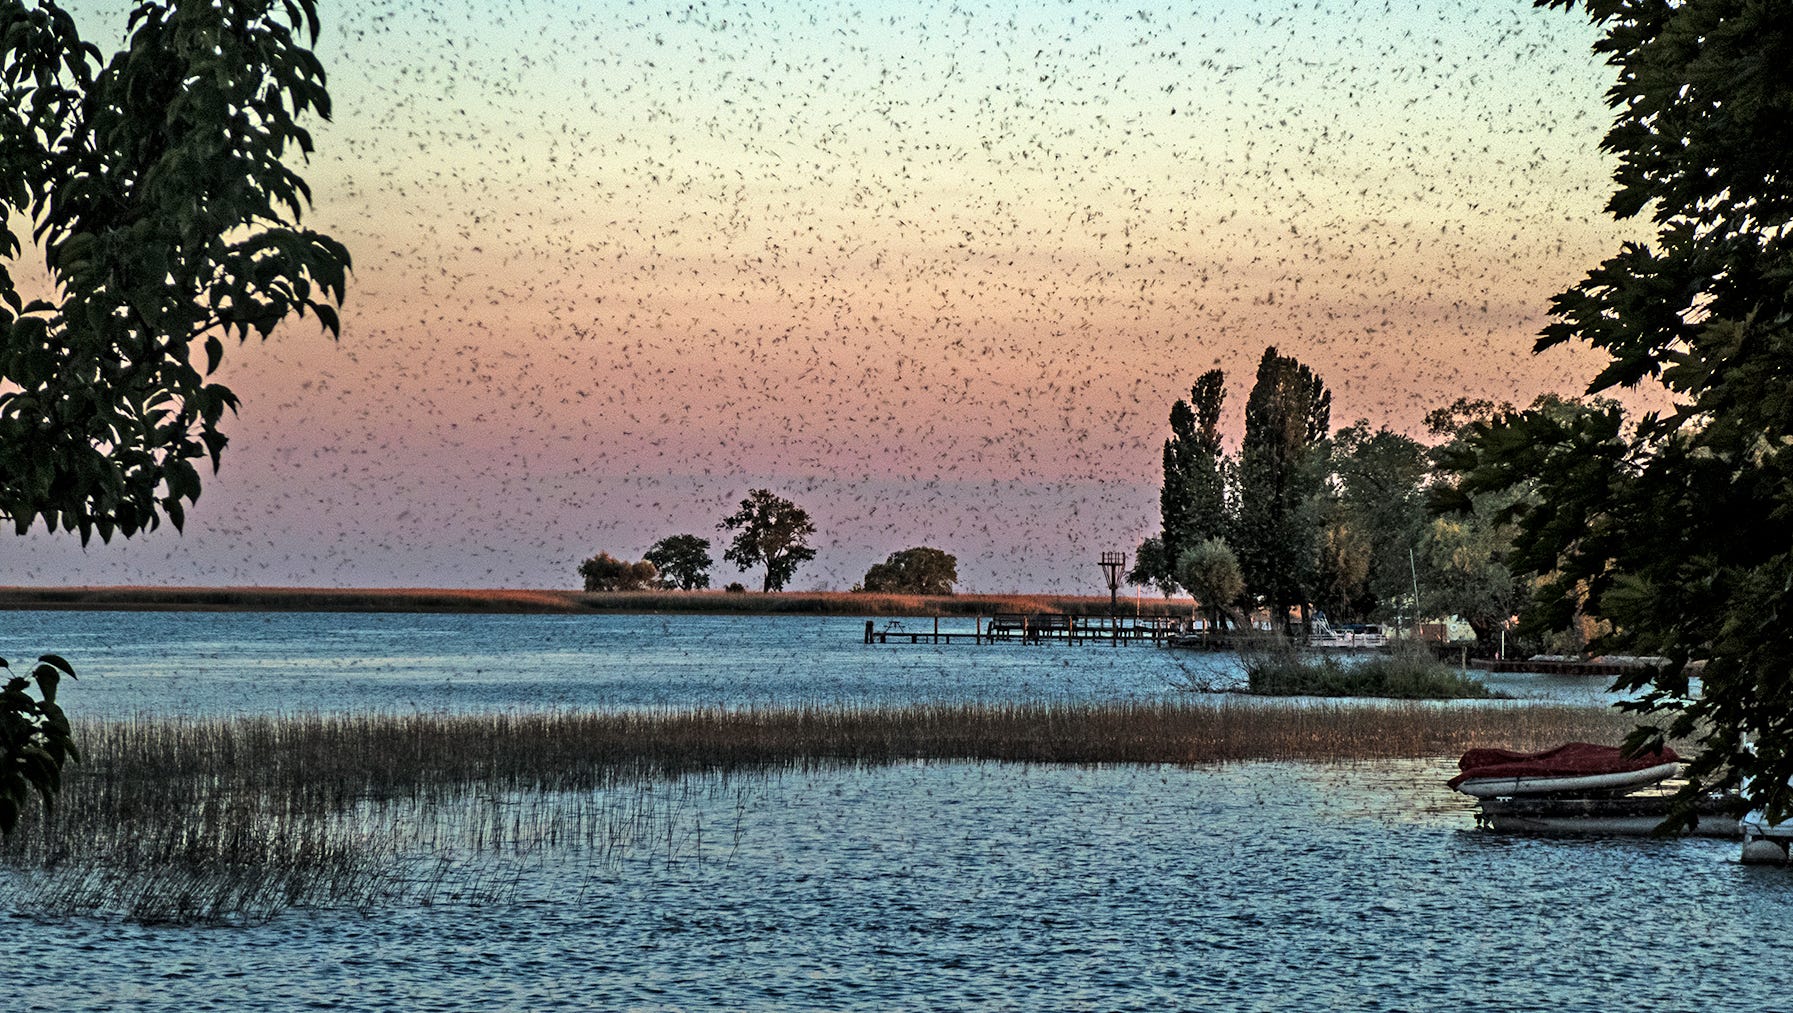 "Fishfly City," by Edward Byrnes of Rochester, shows a June scene familiar to those who live near Lake St. Clair:  Just before sunset, the air is thick with fishflies.  This view looks south across the lake's Sni Bora Channel.